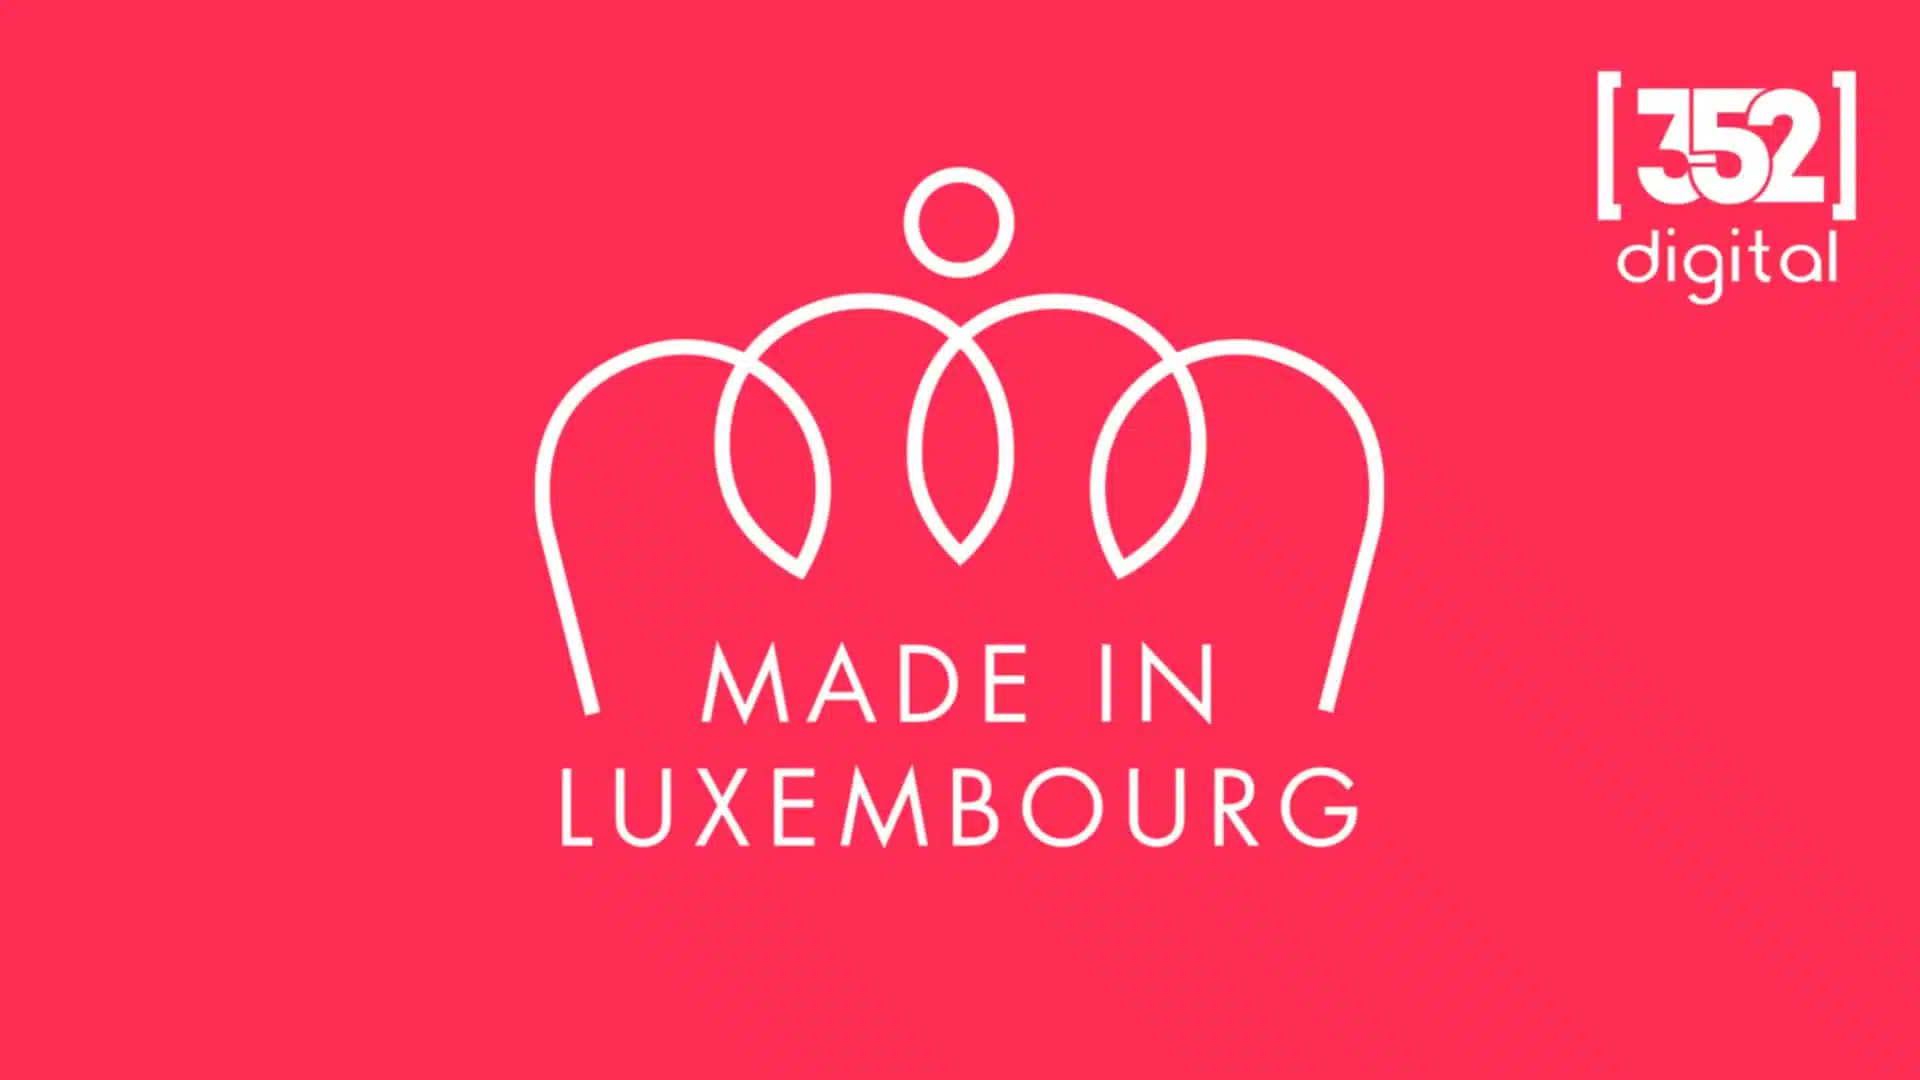 352 Digital Services are made in Luxembourg